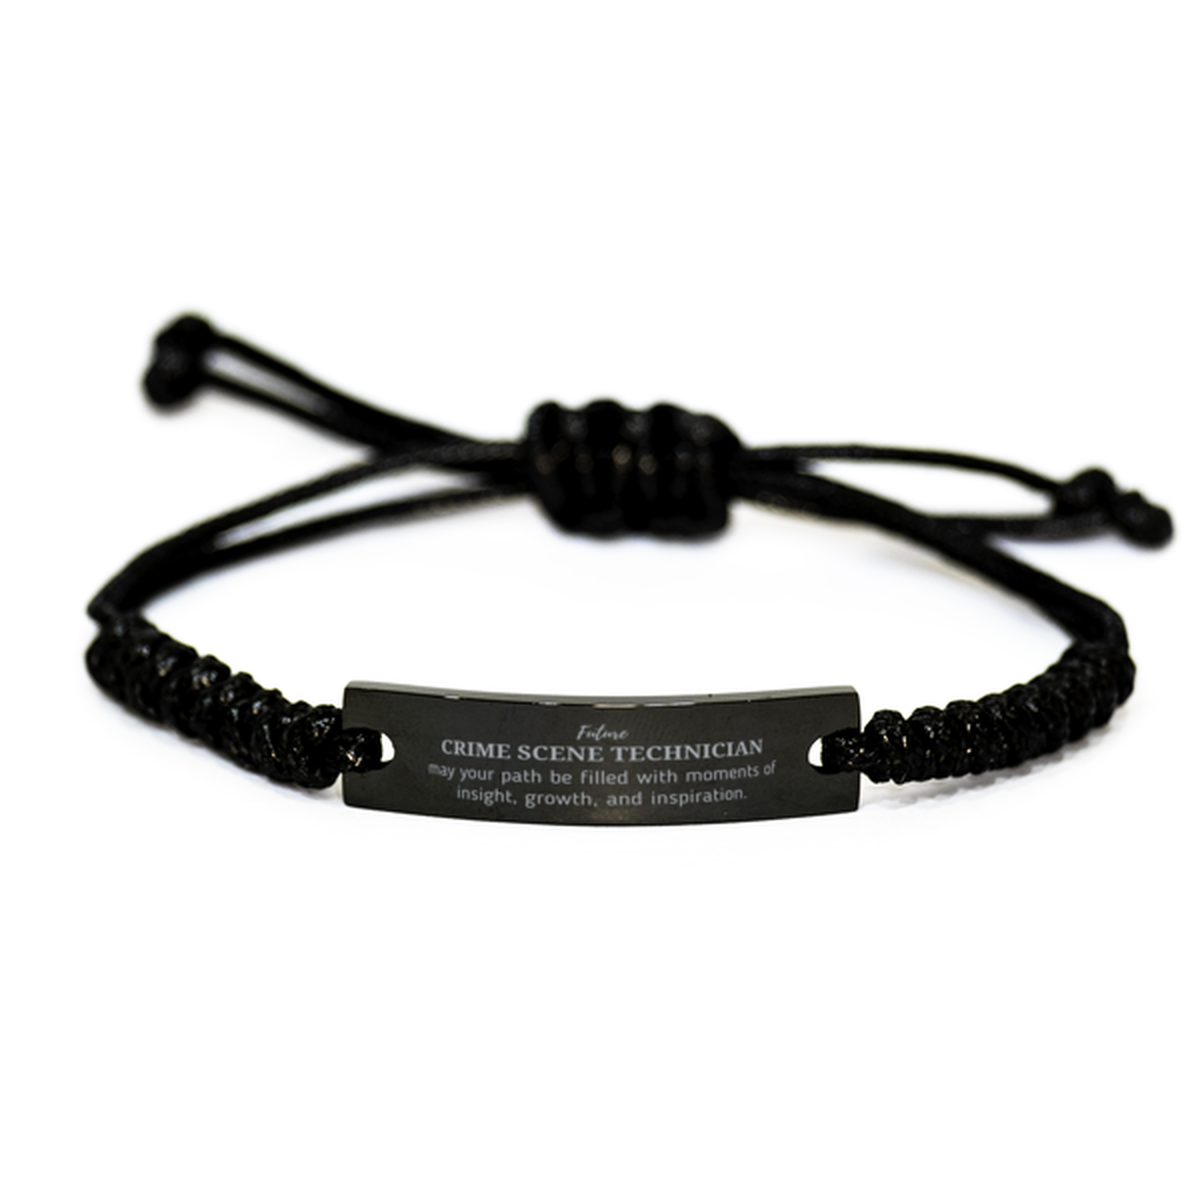 Future Crime Scene Technician Gifts, May your path be filled with moments of insight, Graduation Gifts for New Crime Scene Technician, Christmas Unique Black Rope Bracelet For Men, Women, Friends